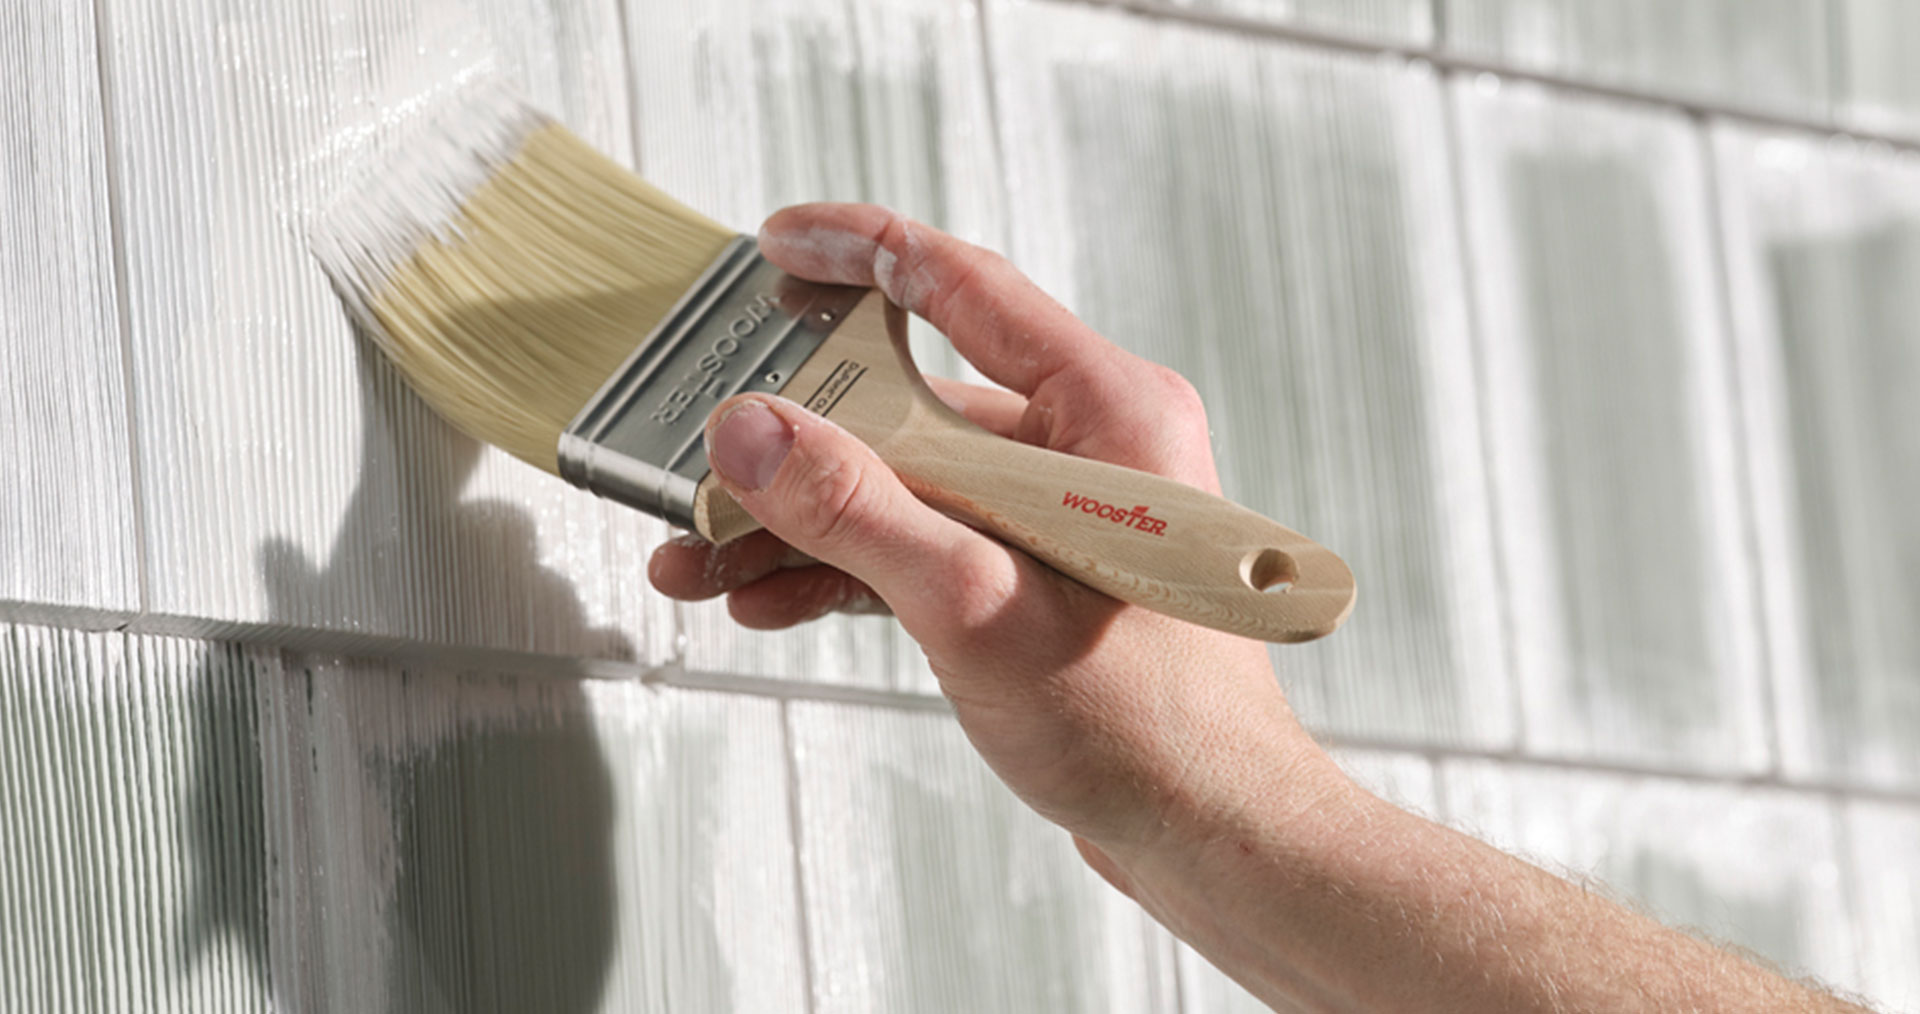 Types Of Wall Paint Brushes - How To Select The Best Wall Paint